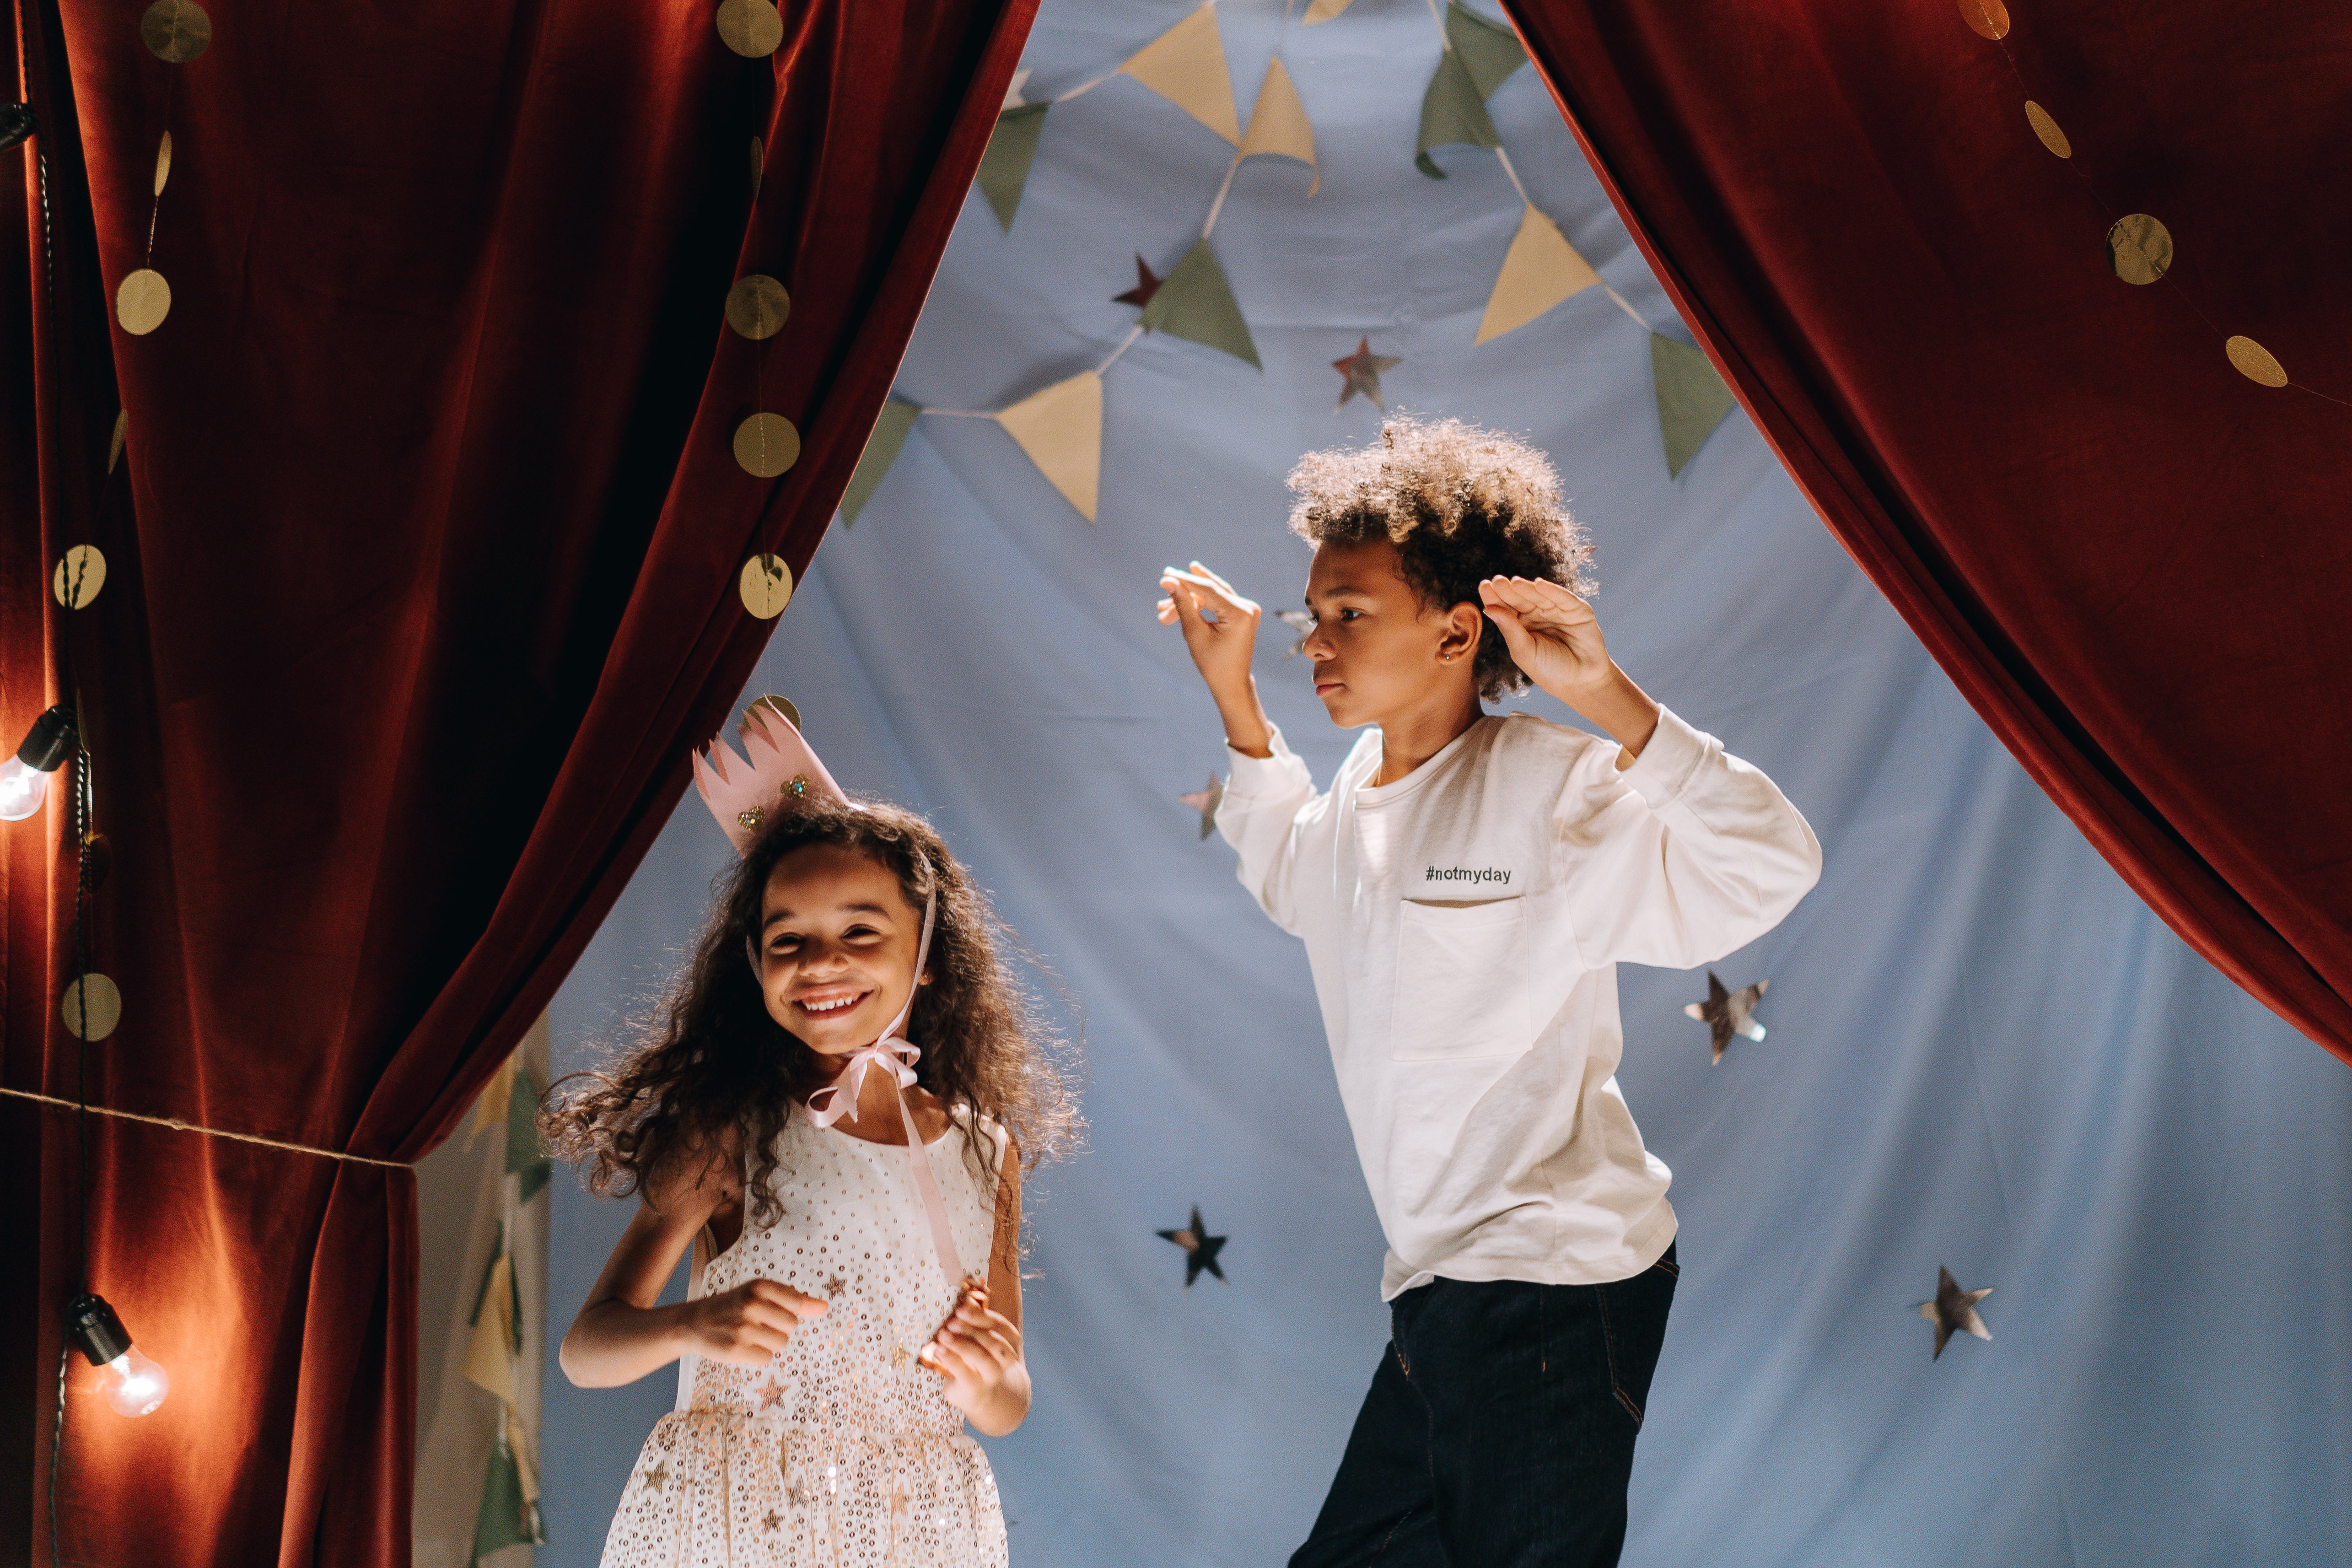 Two children acting in their own play. Picture by cottonbro studio for Pexels